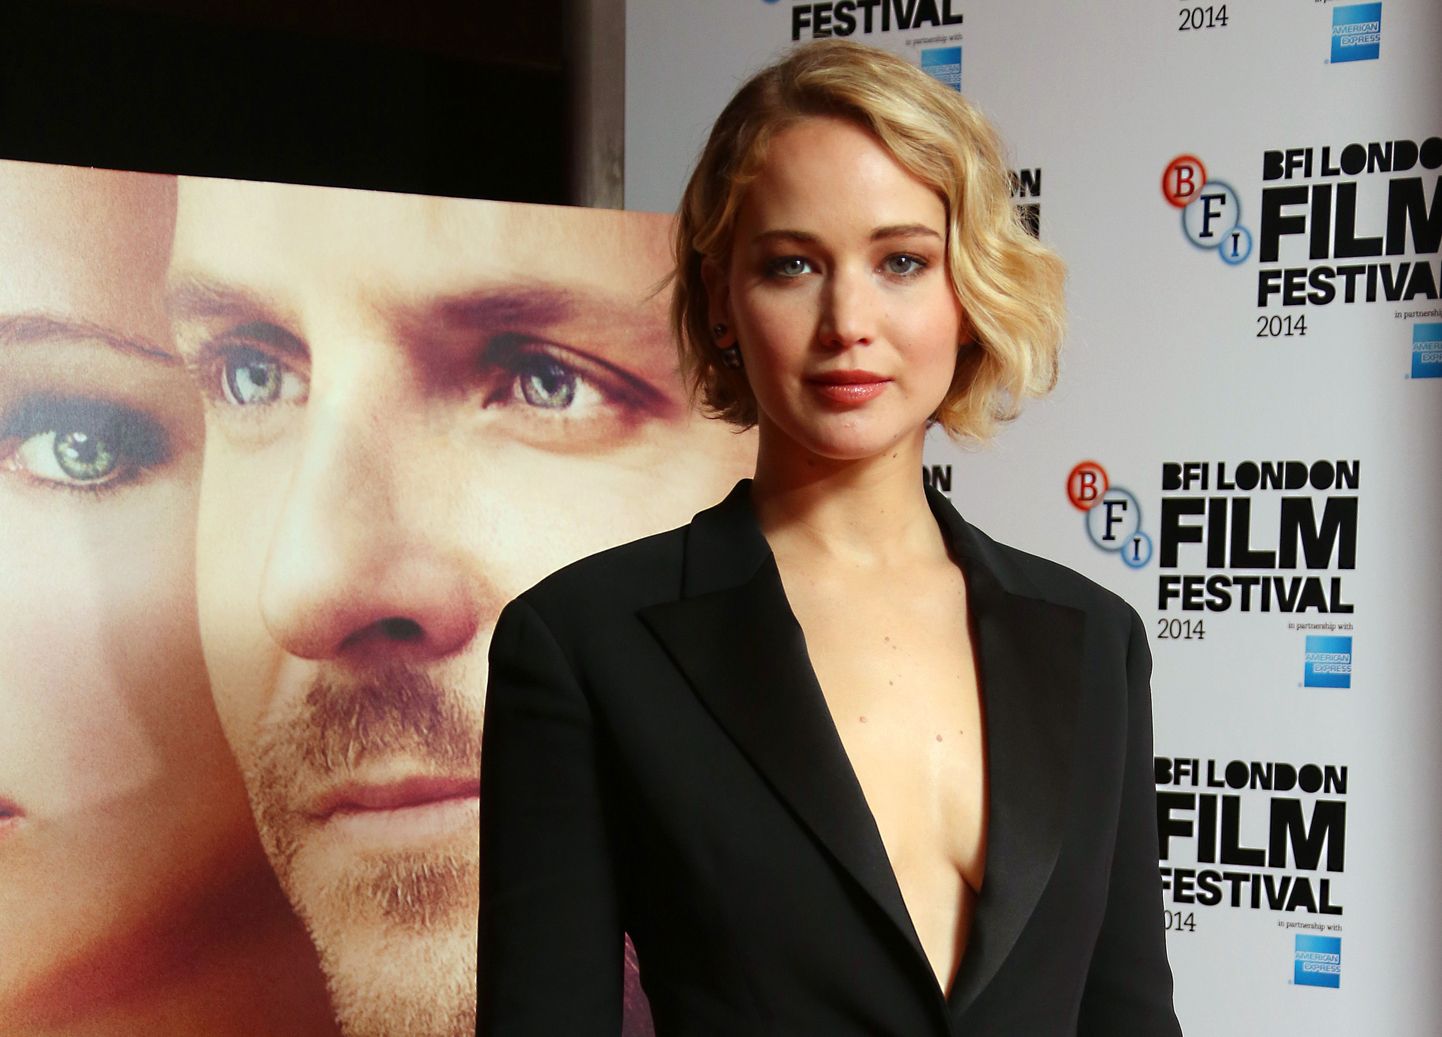 Actress Jennifer Lawrence poses for photographs during the photo call for the film Serena, as part of the BFI London Film Festival, at the Vue cinema in central London, Monday, Oct. 13, 2014. (Photo by Joel Ryan/Invision/AP) / TT / kod 436